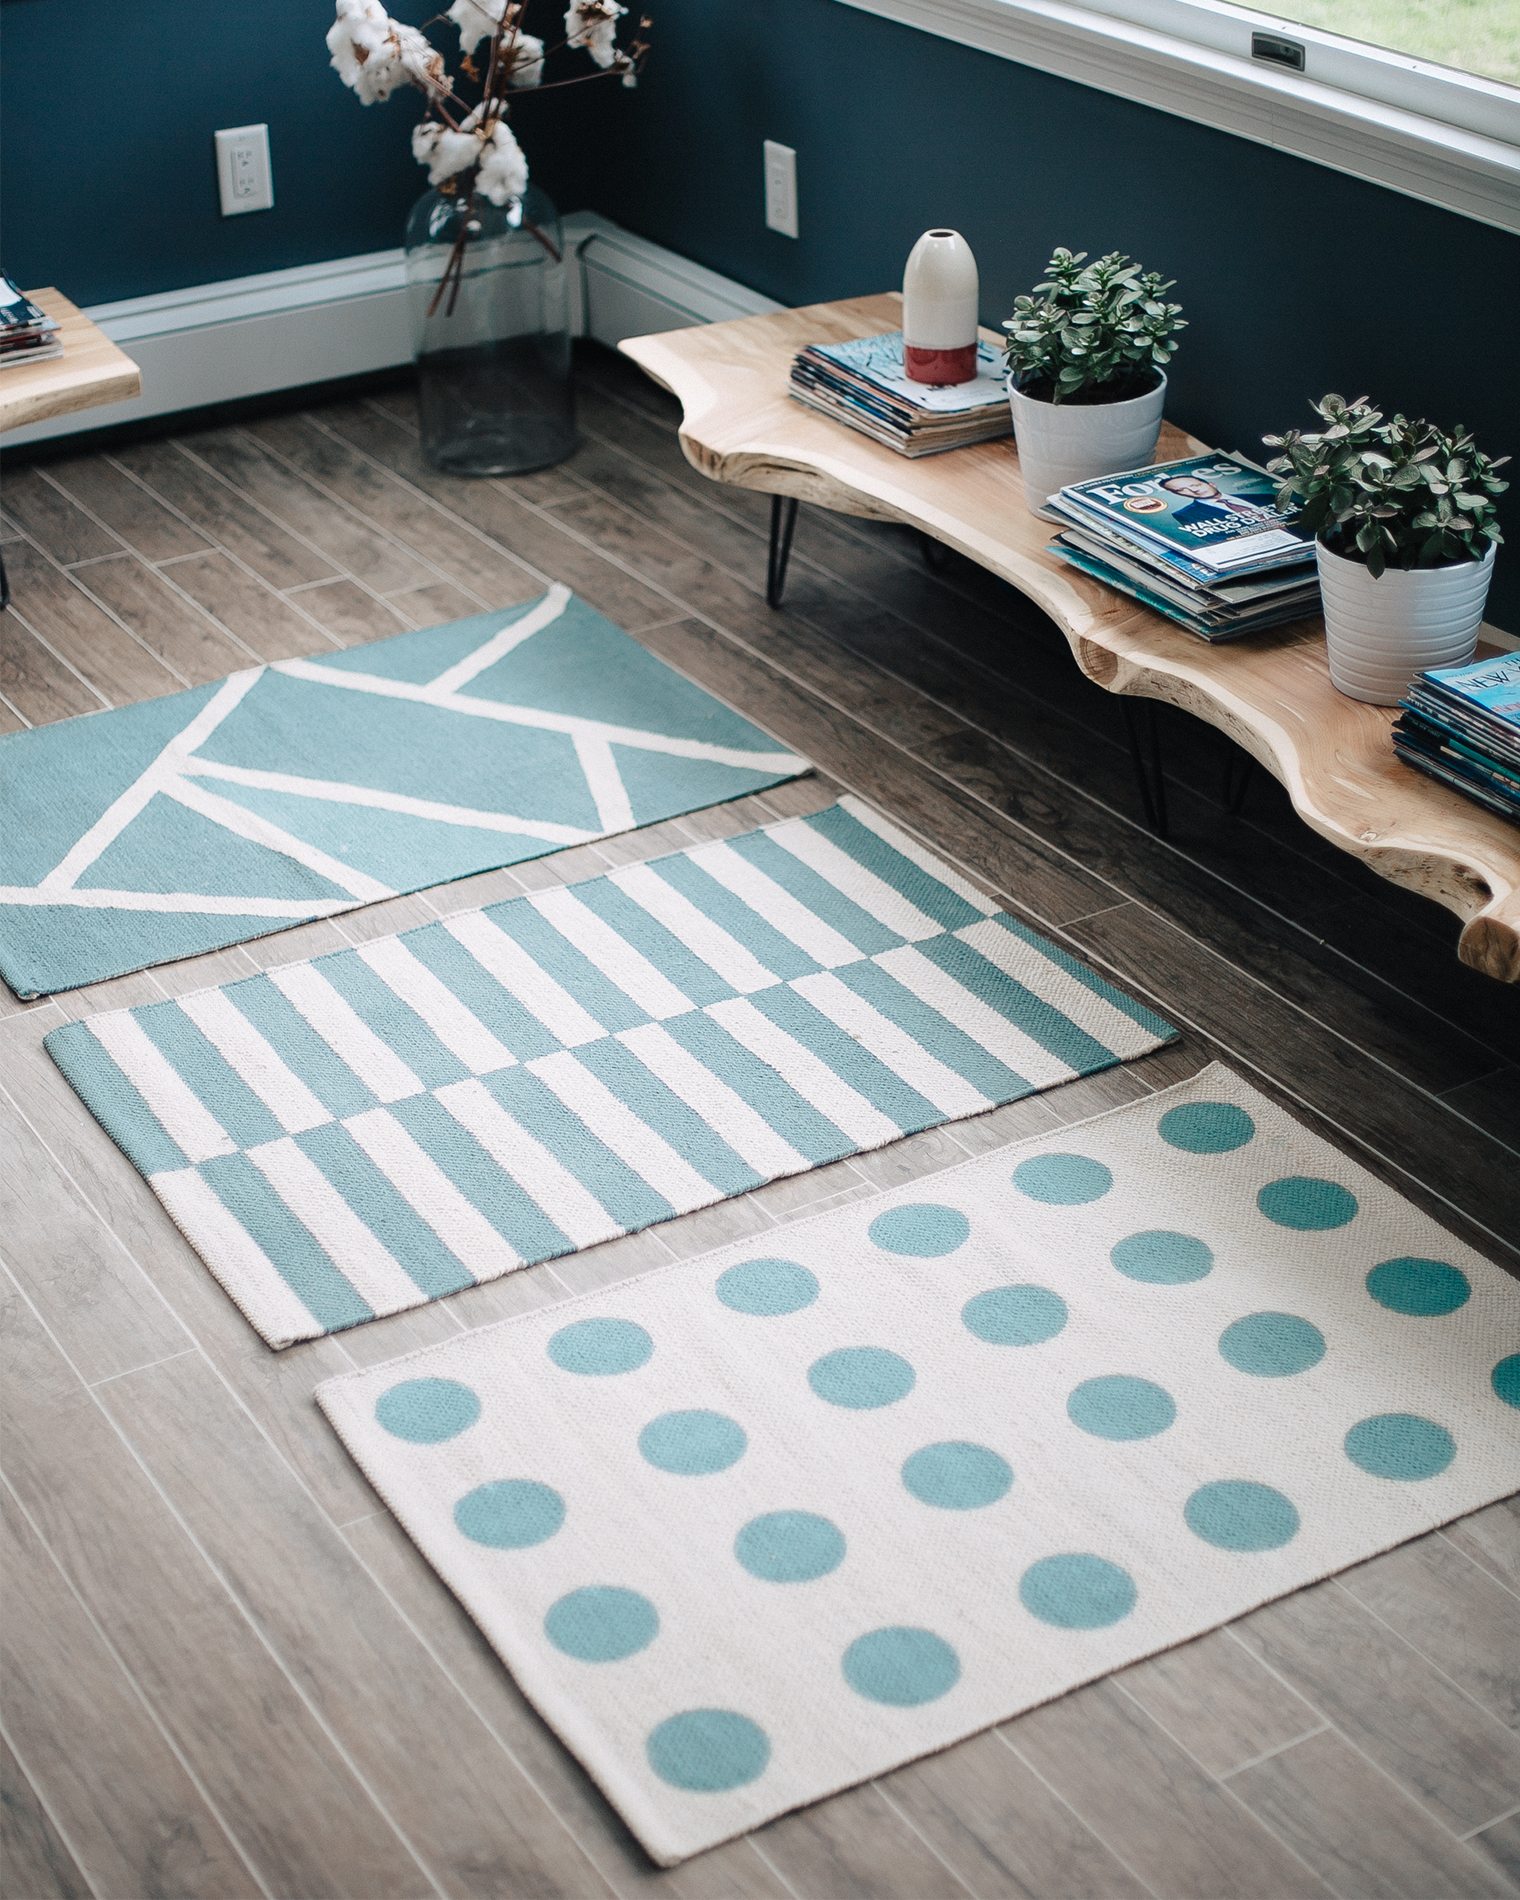 DIY-Painted-Patterned-Rugs-Project-How-To-4